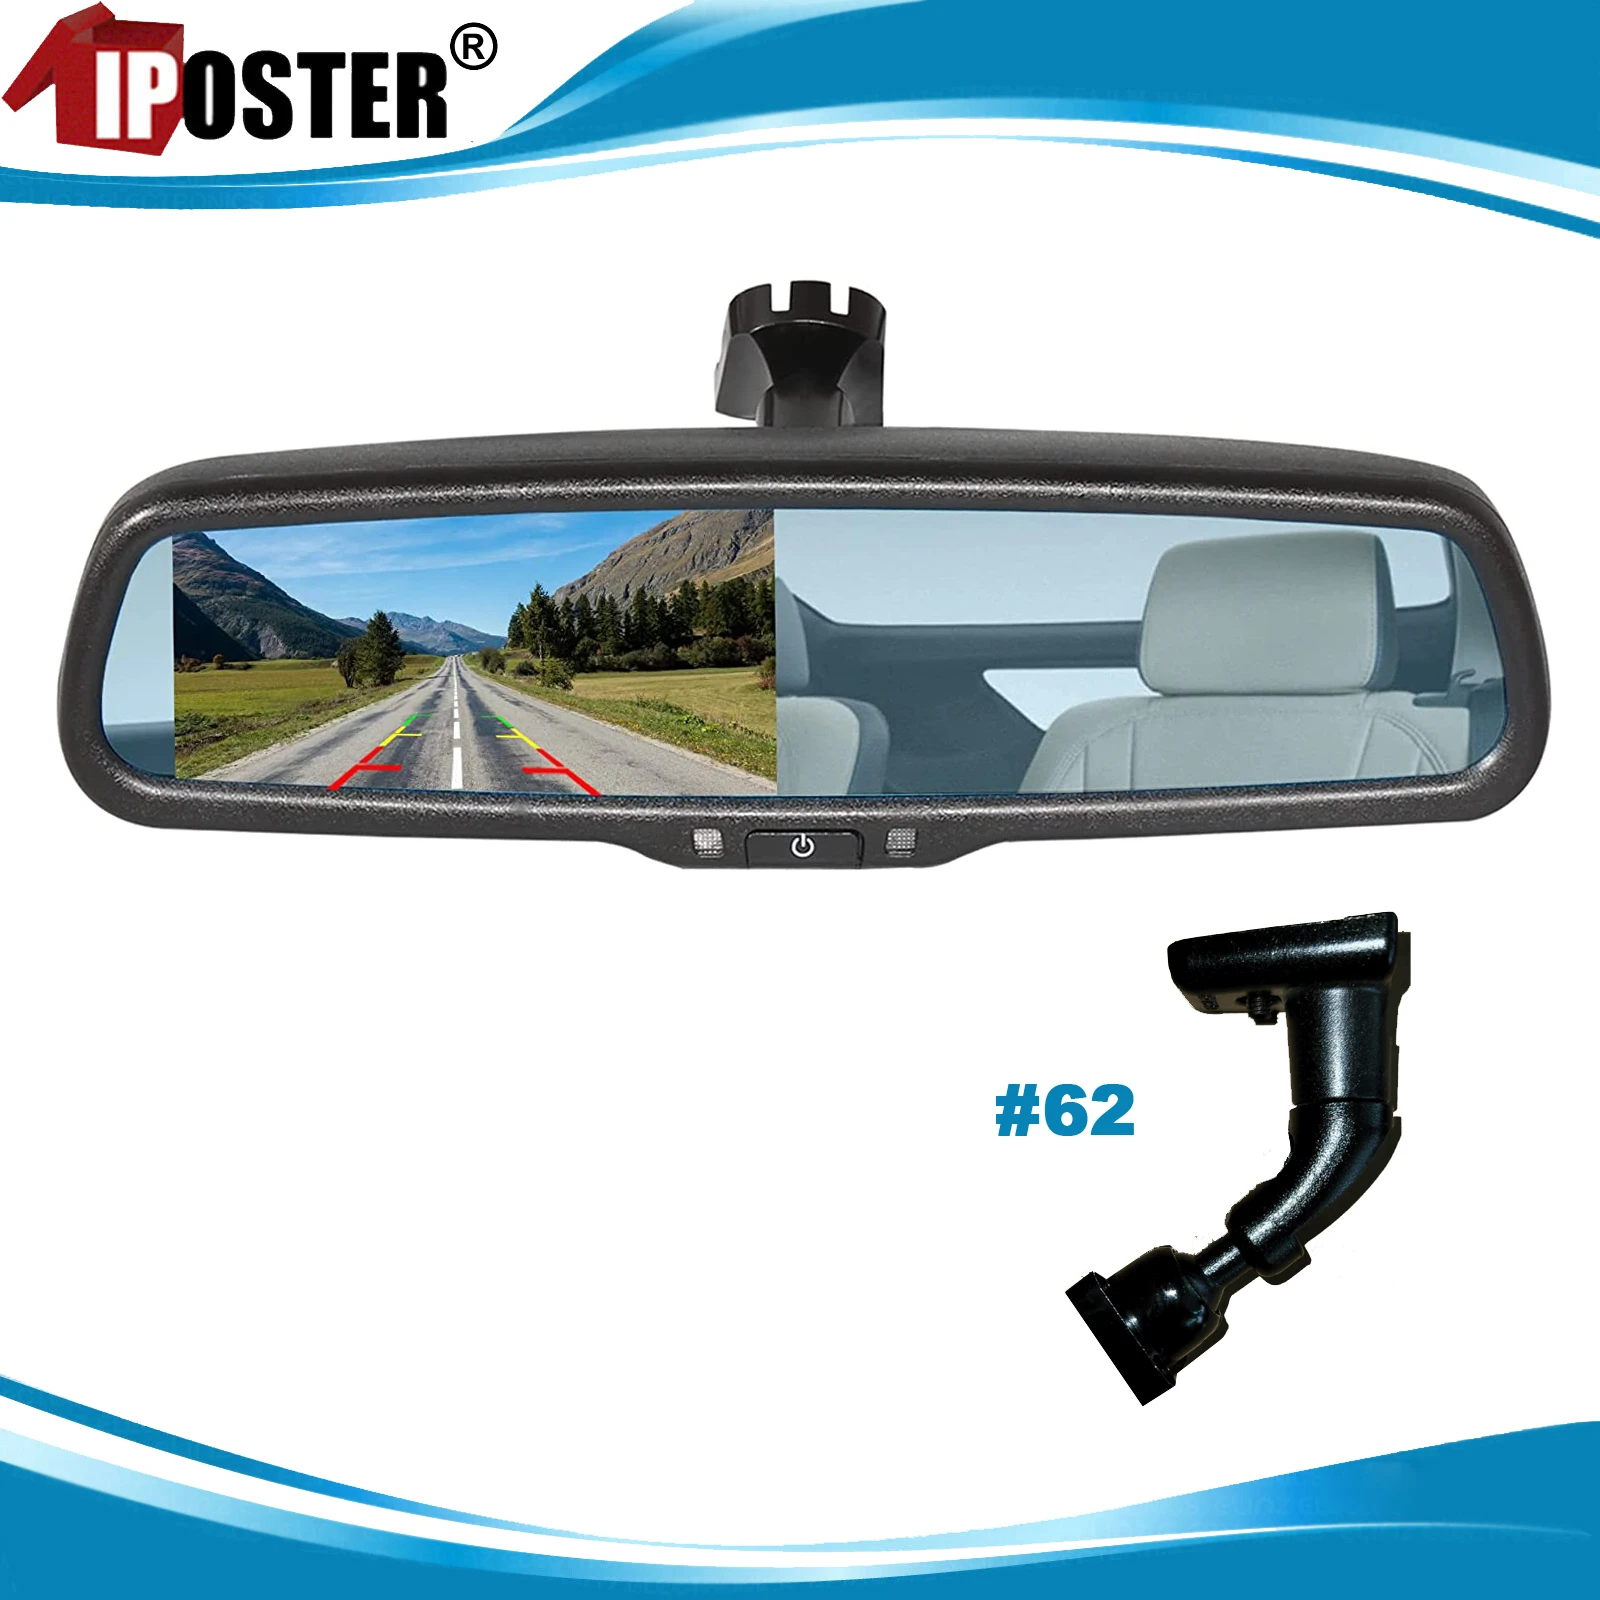 

iPoster Parking Assistance HD 800*480 Car Monitor 4.3 TFT LCD Car Parking Rear View Mirror Monitor No62 Mount For Fiat Point